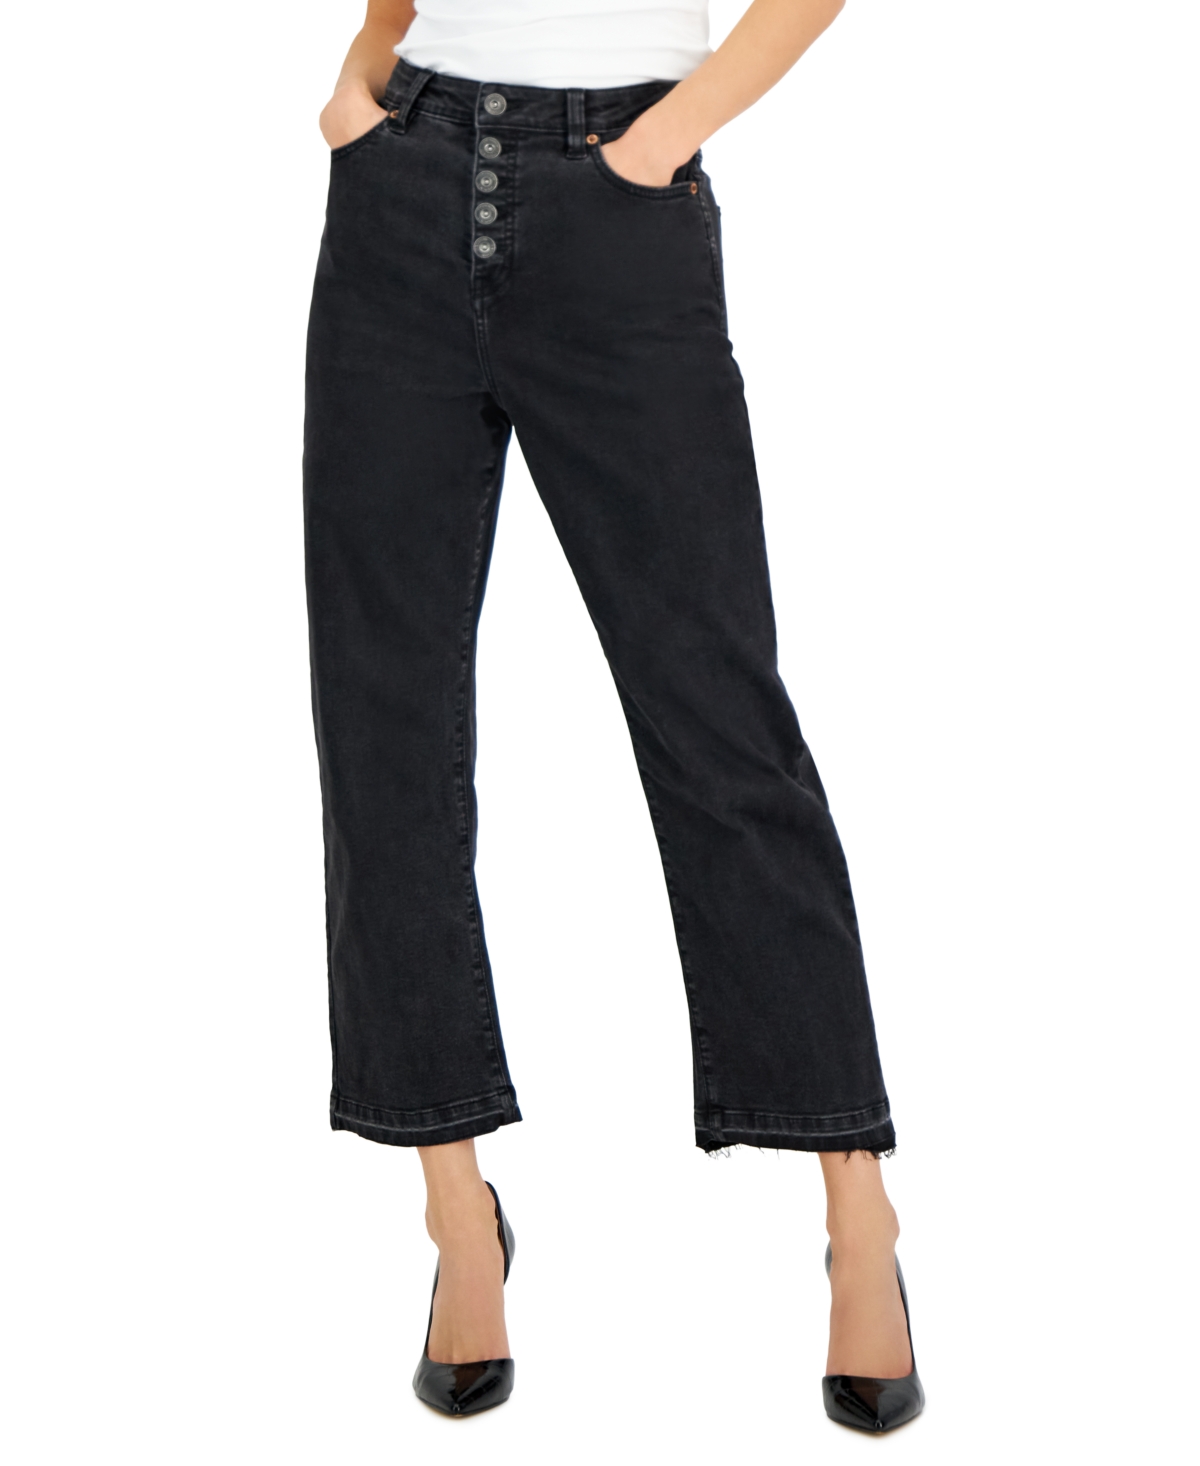  Inc International Concepts Women's High-Rise Button-Fly Straight-Leg Jeans, Created for Macy's